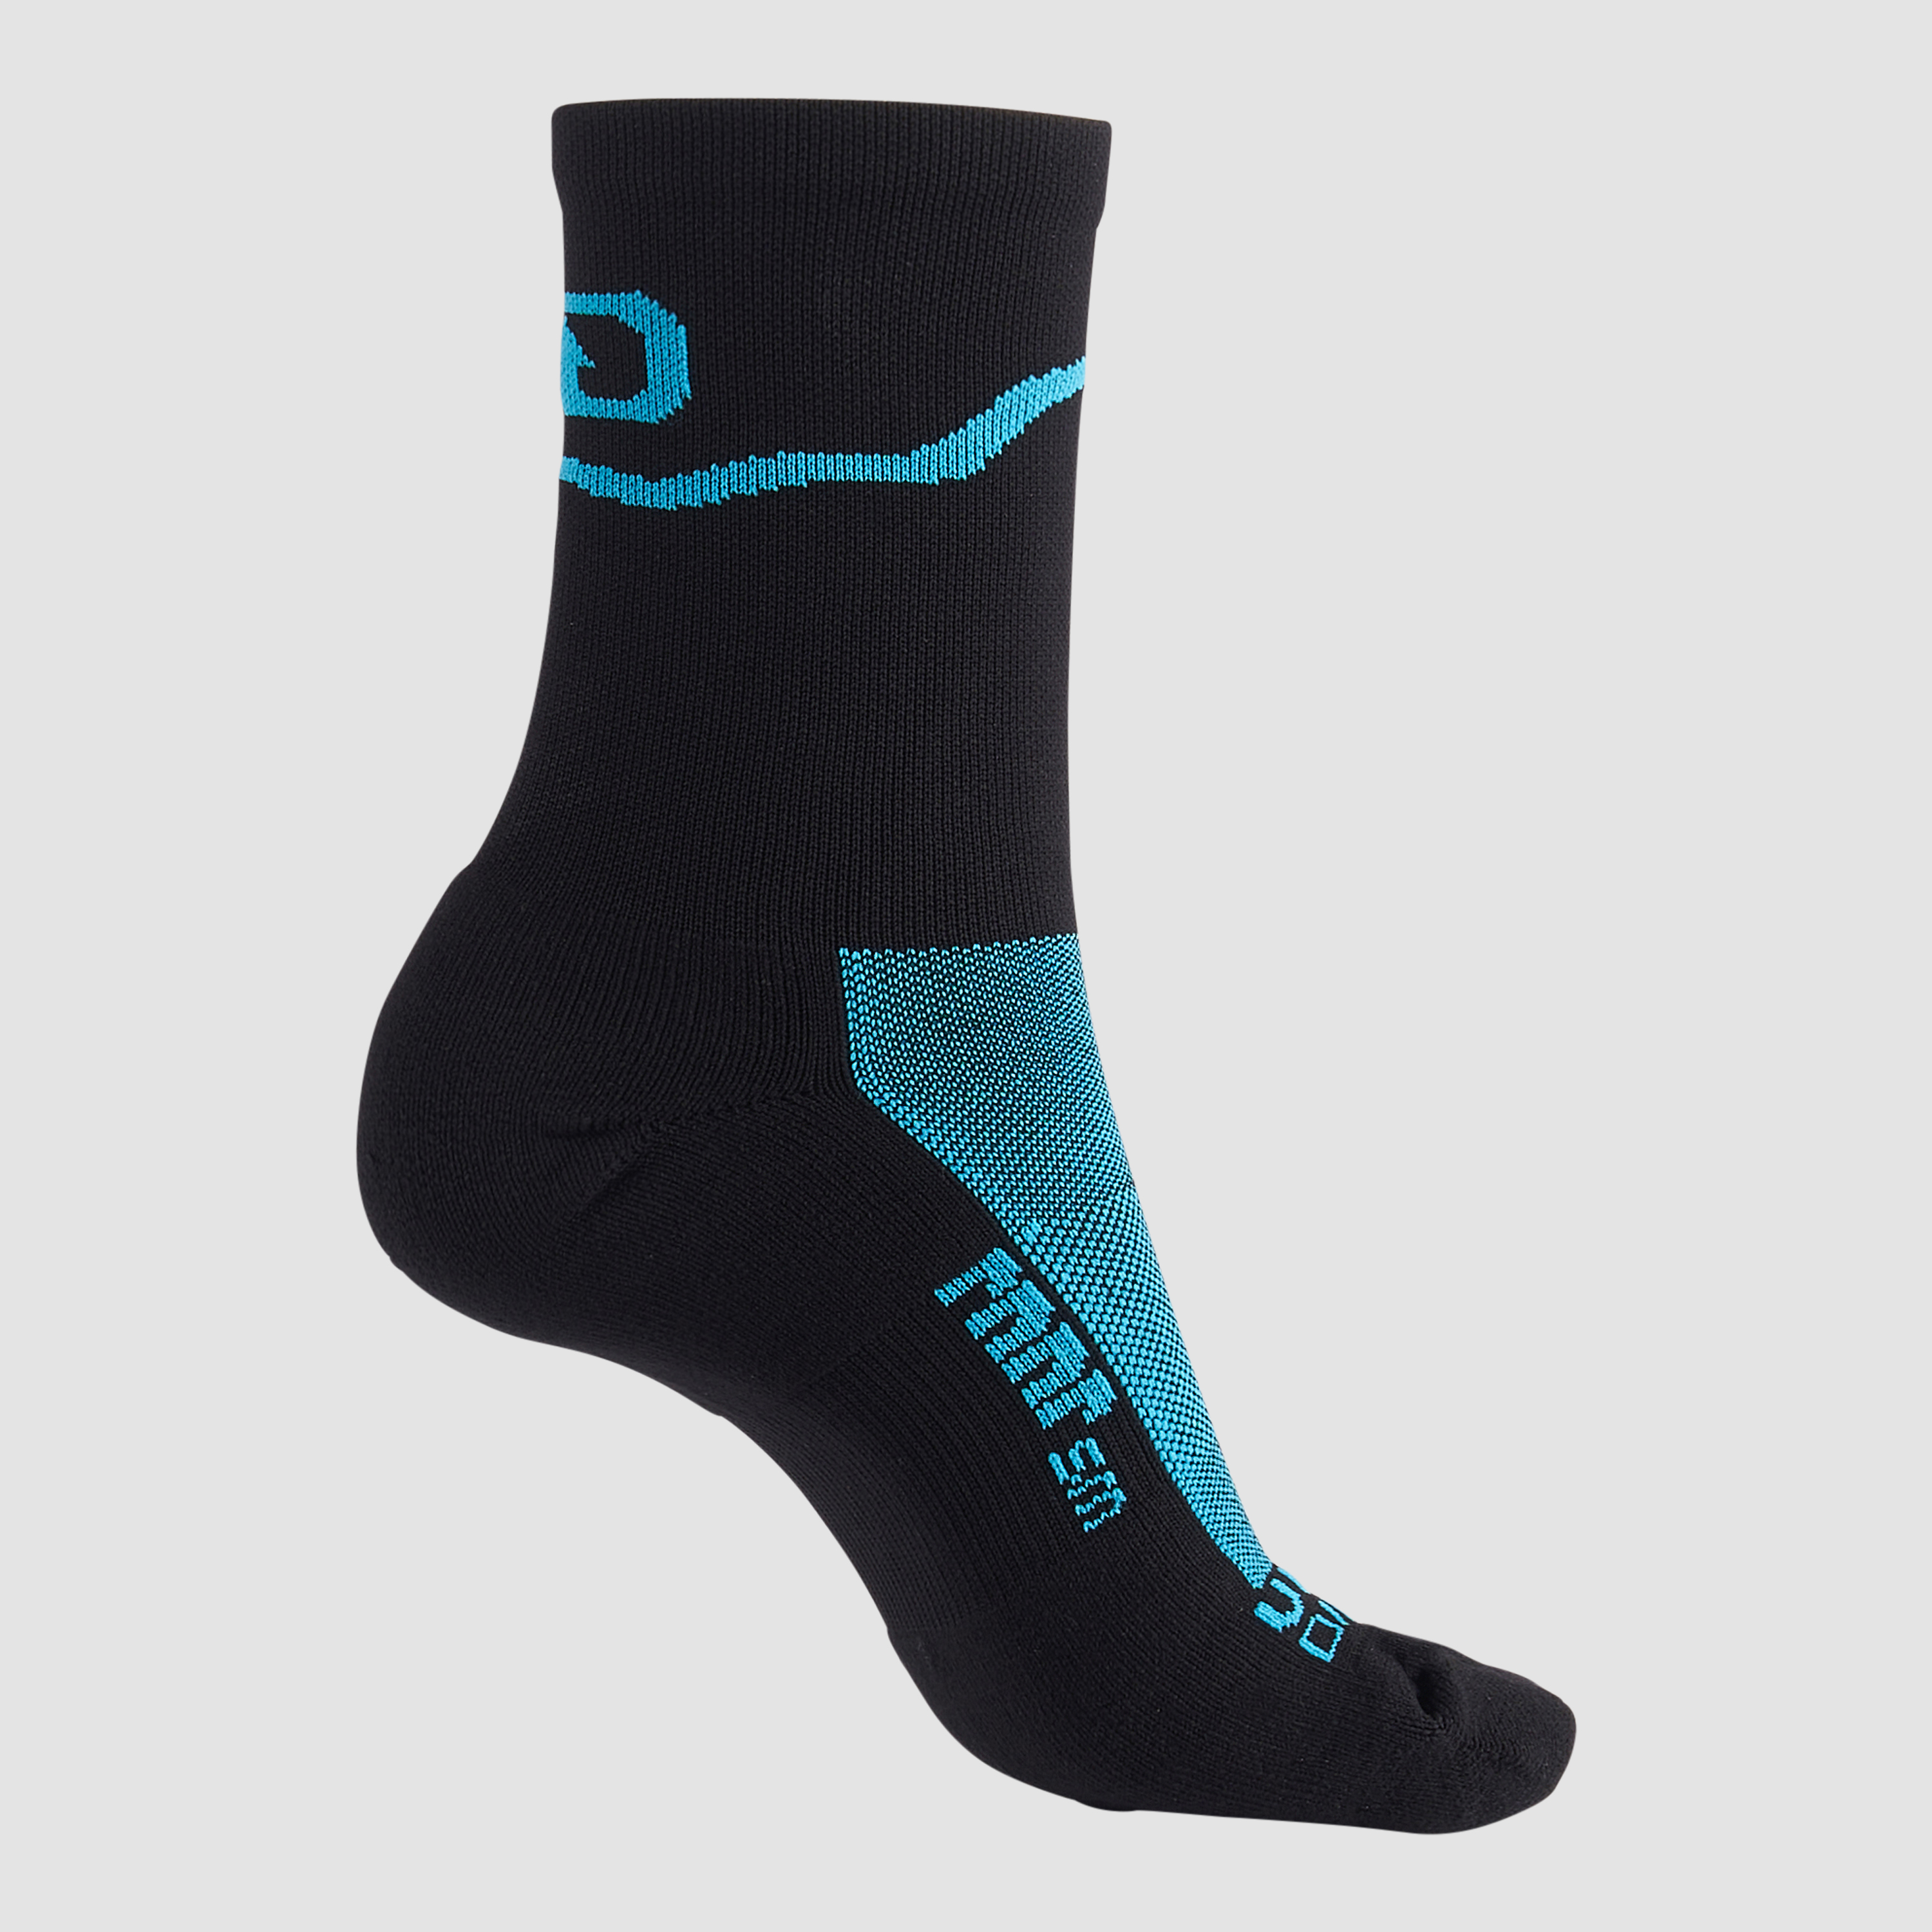 Ultimate Direction UD Micro Crew Sock in Onyx Size Small/Medium